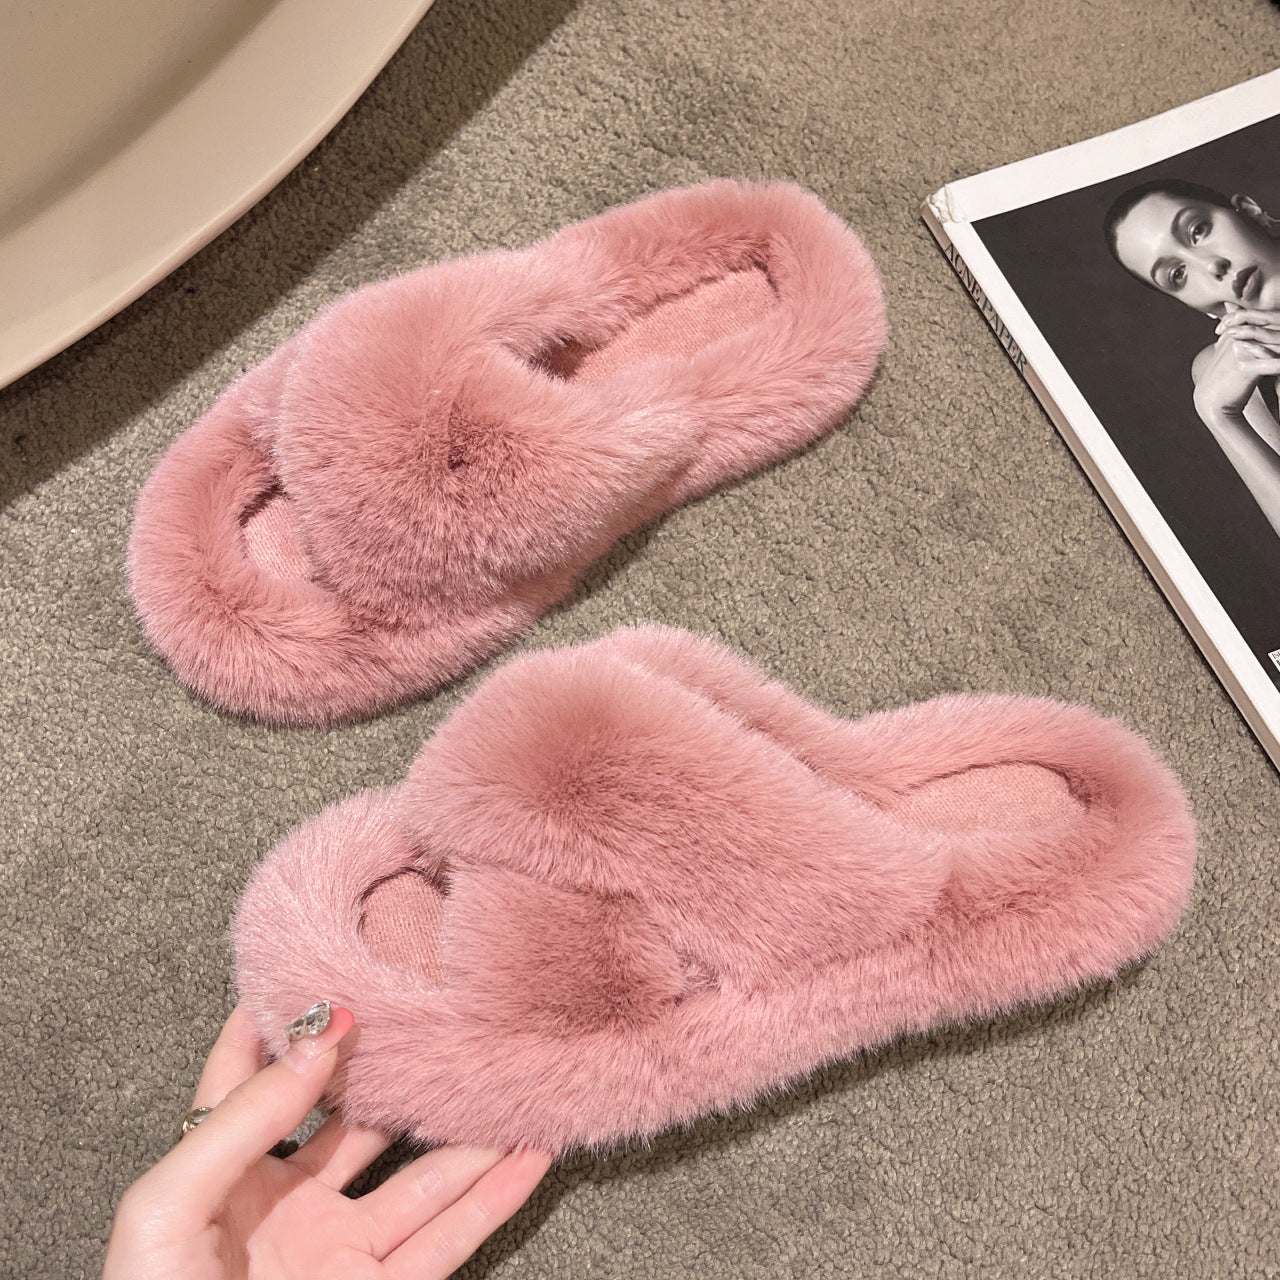 Ladies Plush Slippers Outer Wear Faux Fur Sandals Winter Home Slip On